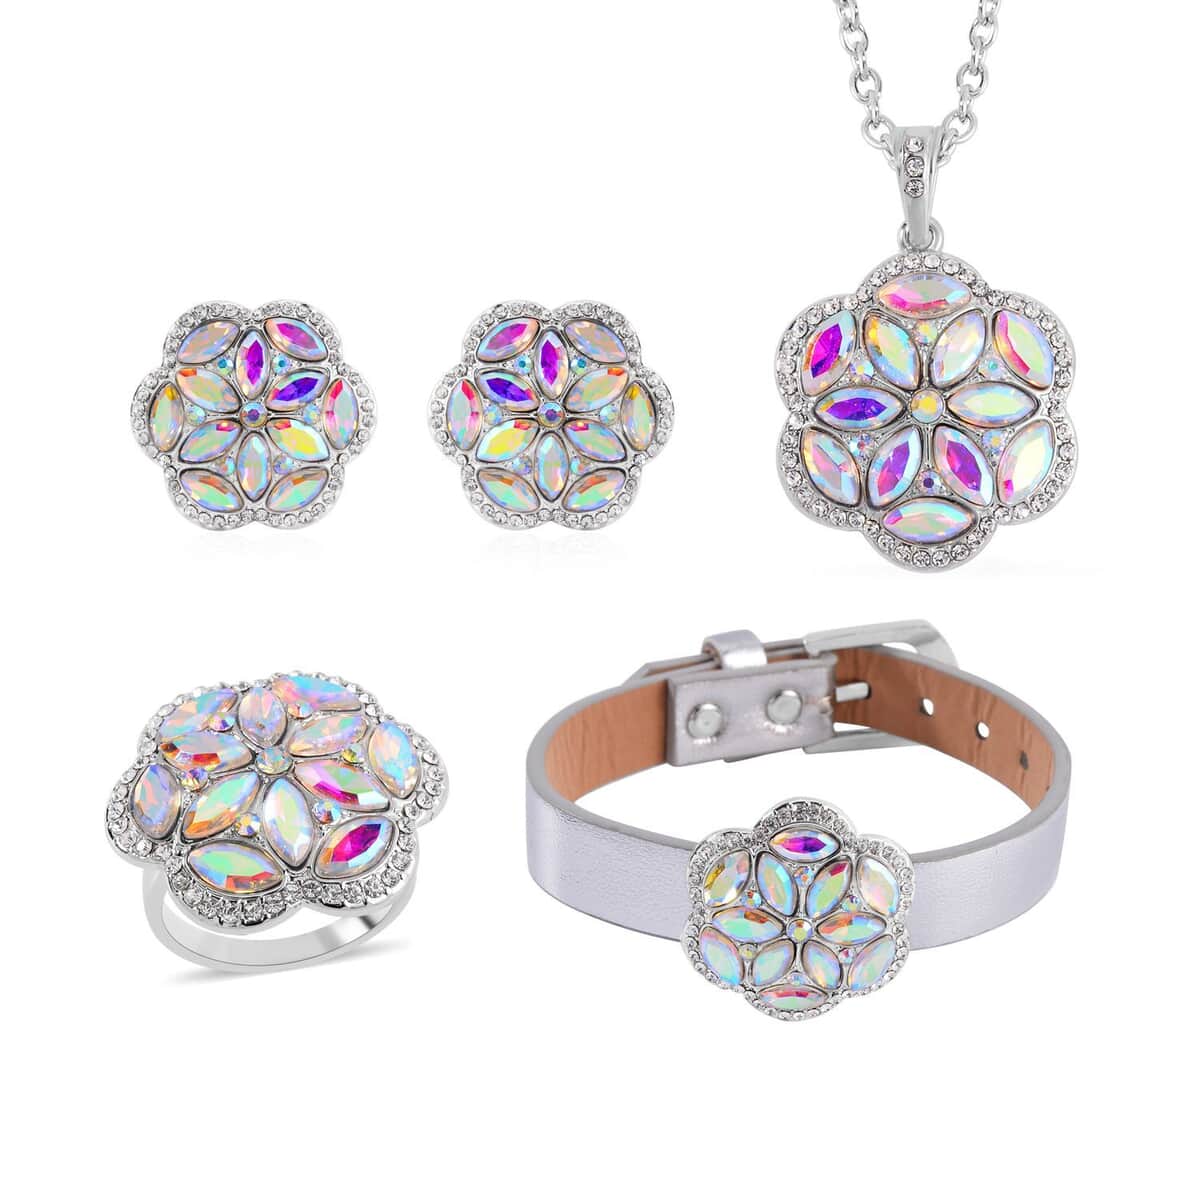 Aurora Borealis and White Austrian Crystal, Faux Leather Floral Bracelet (6-8In), Earrings, Ring (Size 7.0) and Pendant Necklace 20-22 Inches In Silvertone image number 0